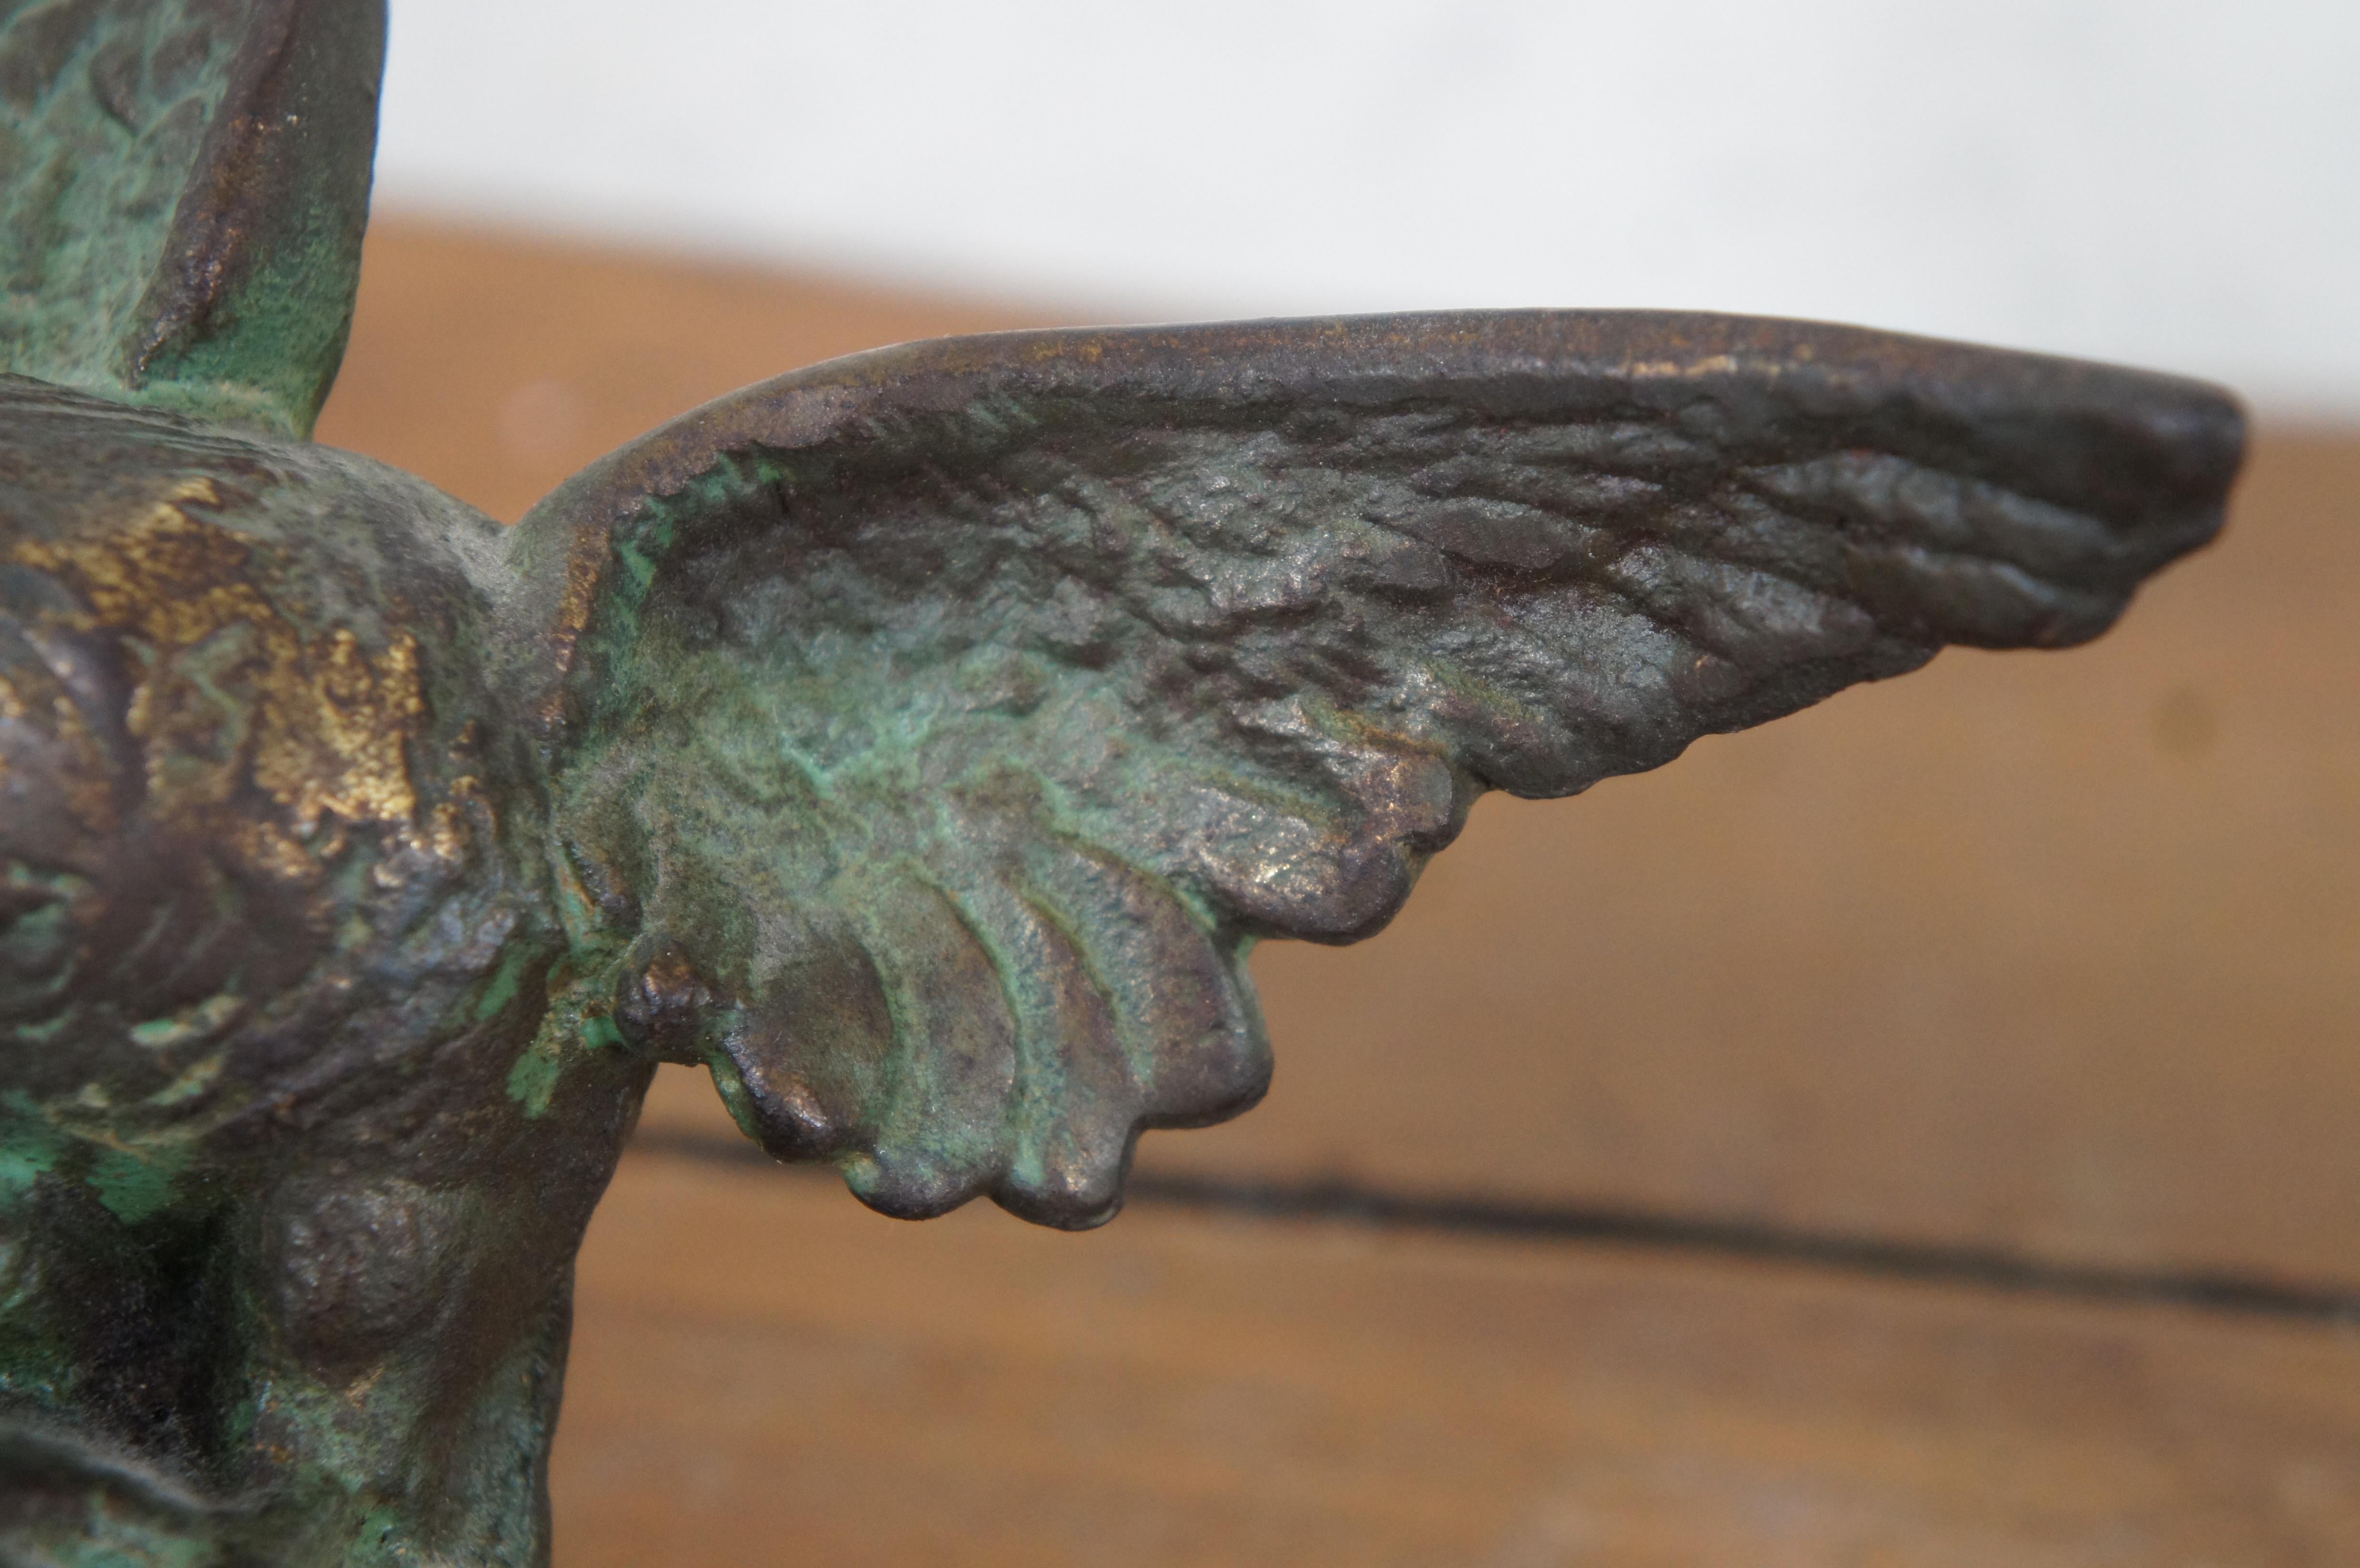 Antique Cast Iron American Eagle Bookends Doorstops 6